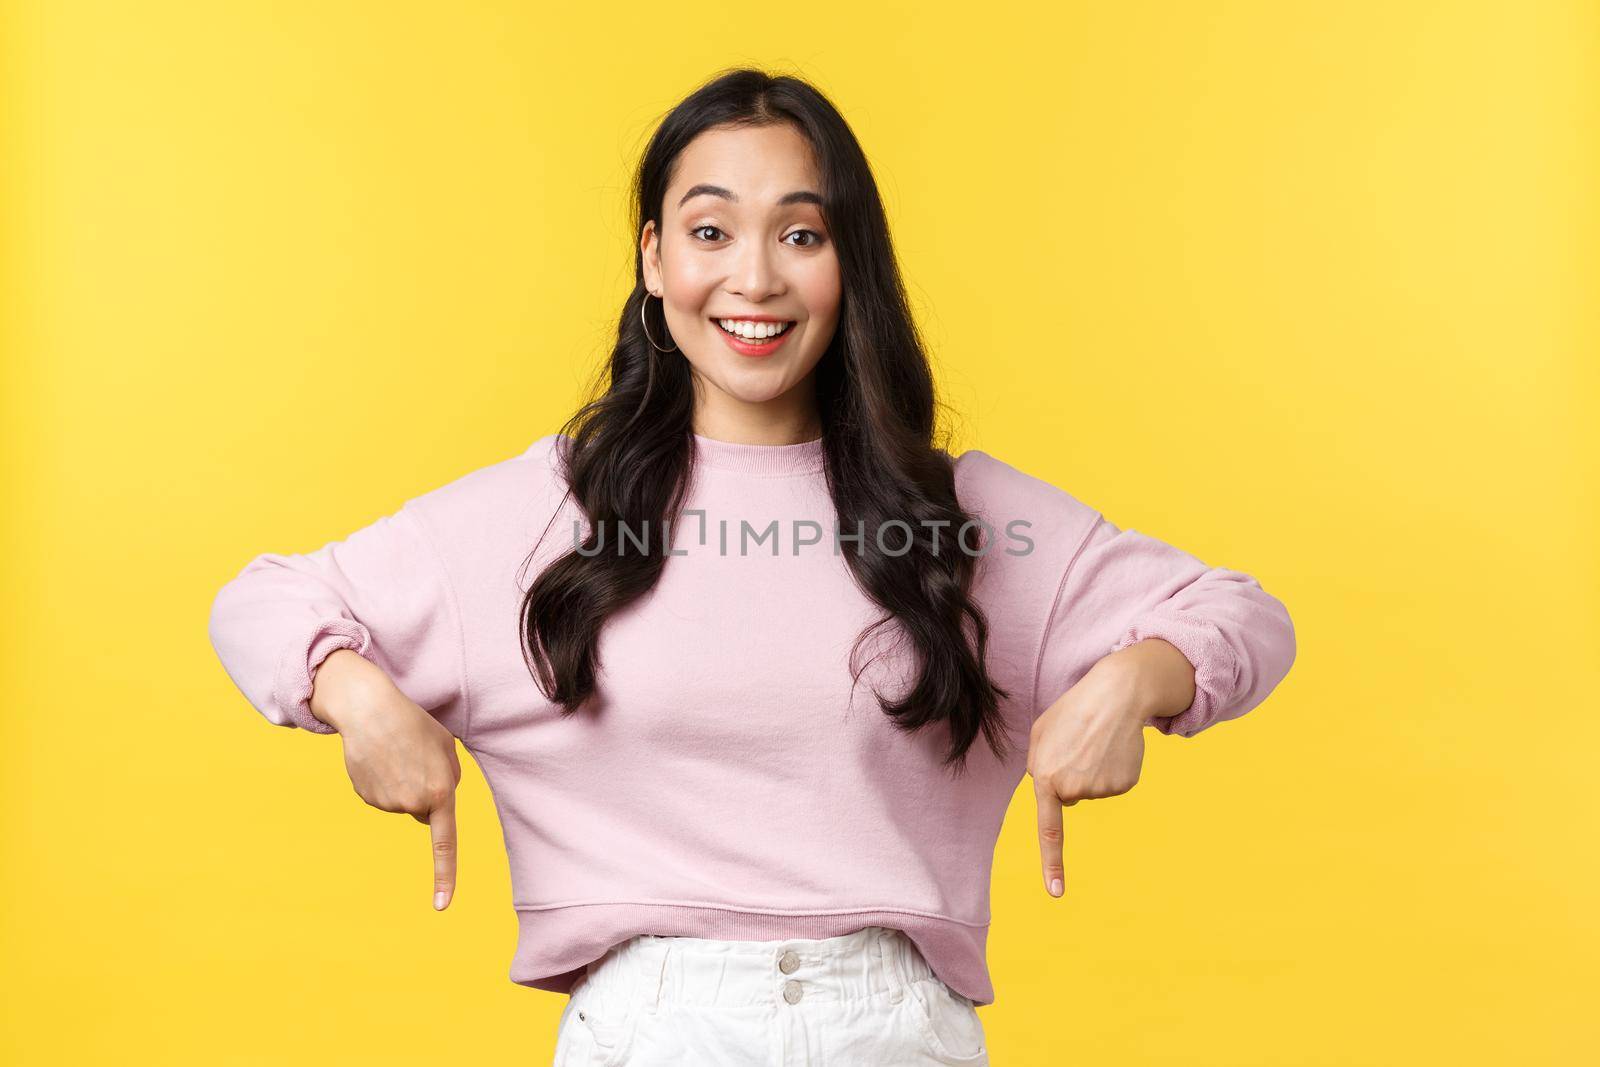 People emotions, lifestyle and fashion concept. Happy upbeat smiling asian girl inviting to click on banner or follow link, subscribe as pointing fingers down and looking camera cheerful.